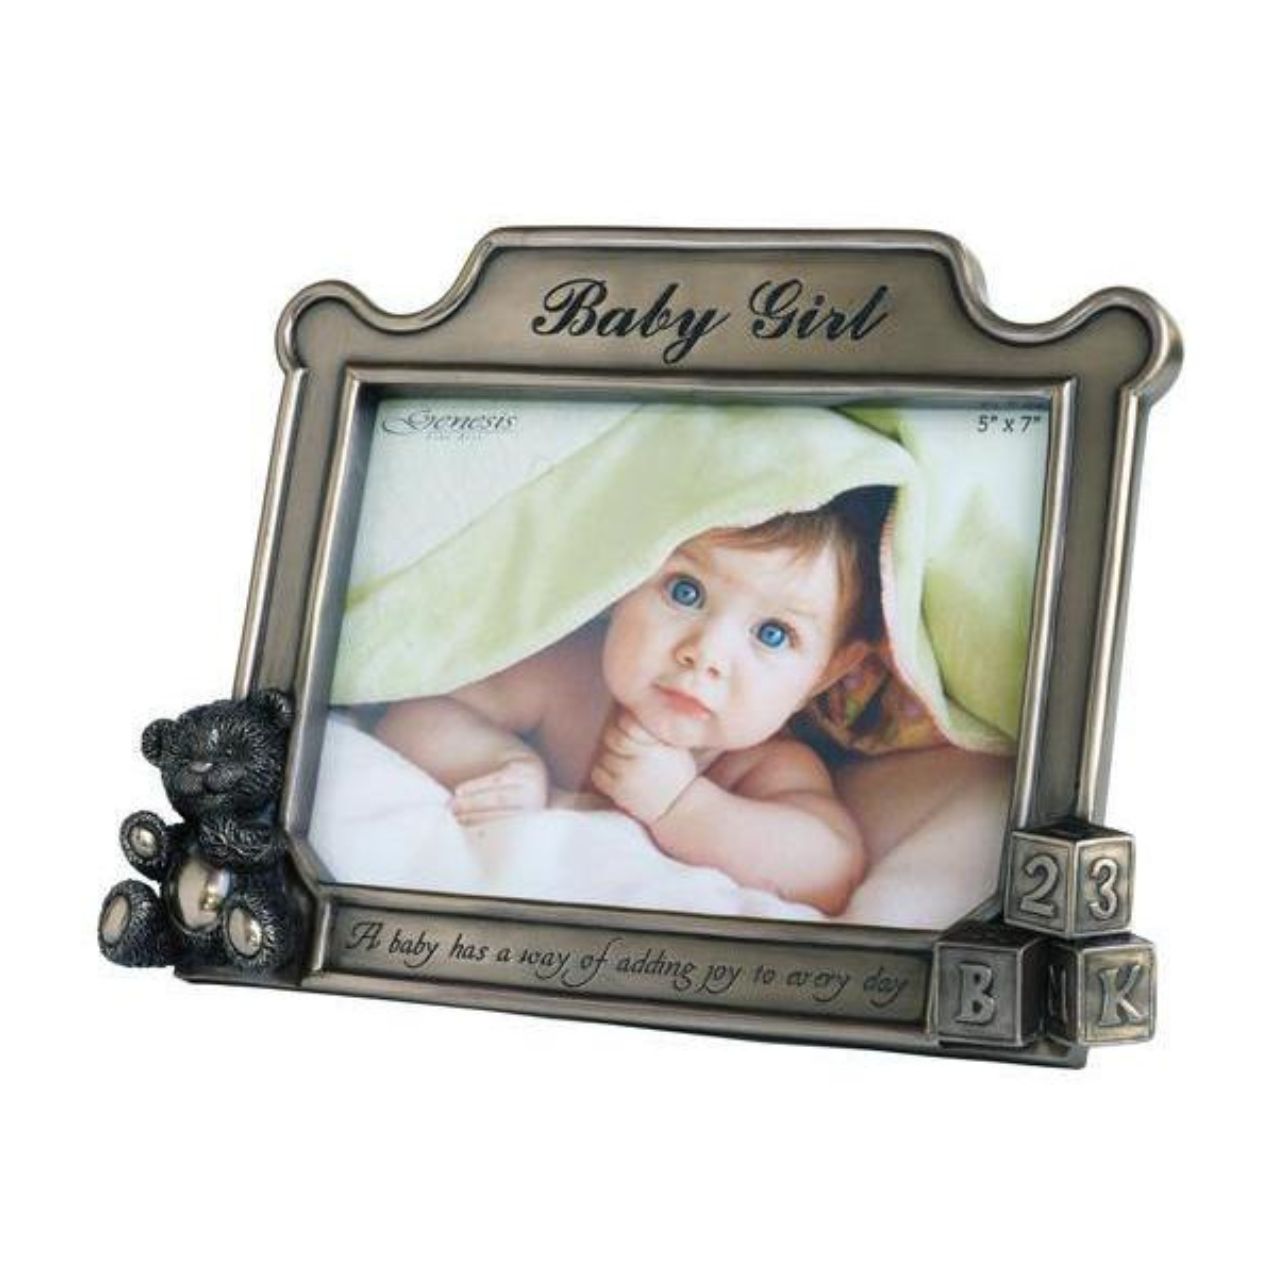 This beautiful photo frame comes with the message inscribed on the front ; "A baby has a way of adding joy to every day." The perfect gift for a new arrival or christening. It holds 5 x 7 photos, and is made of cold cast bronze, measuring,  overall 7" x 9''.